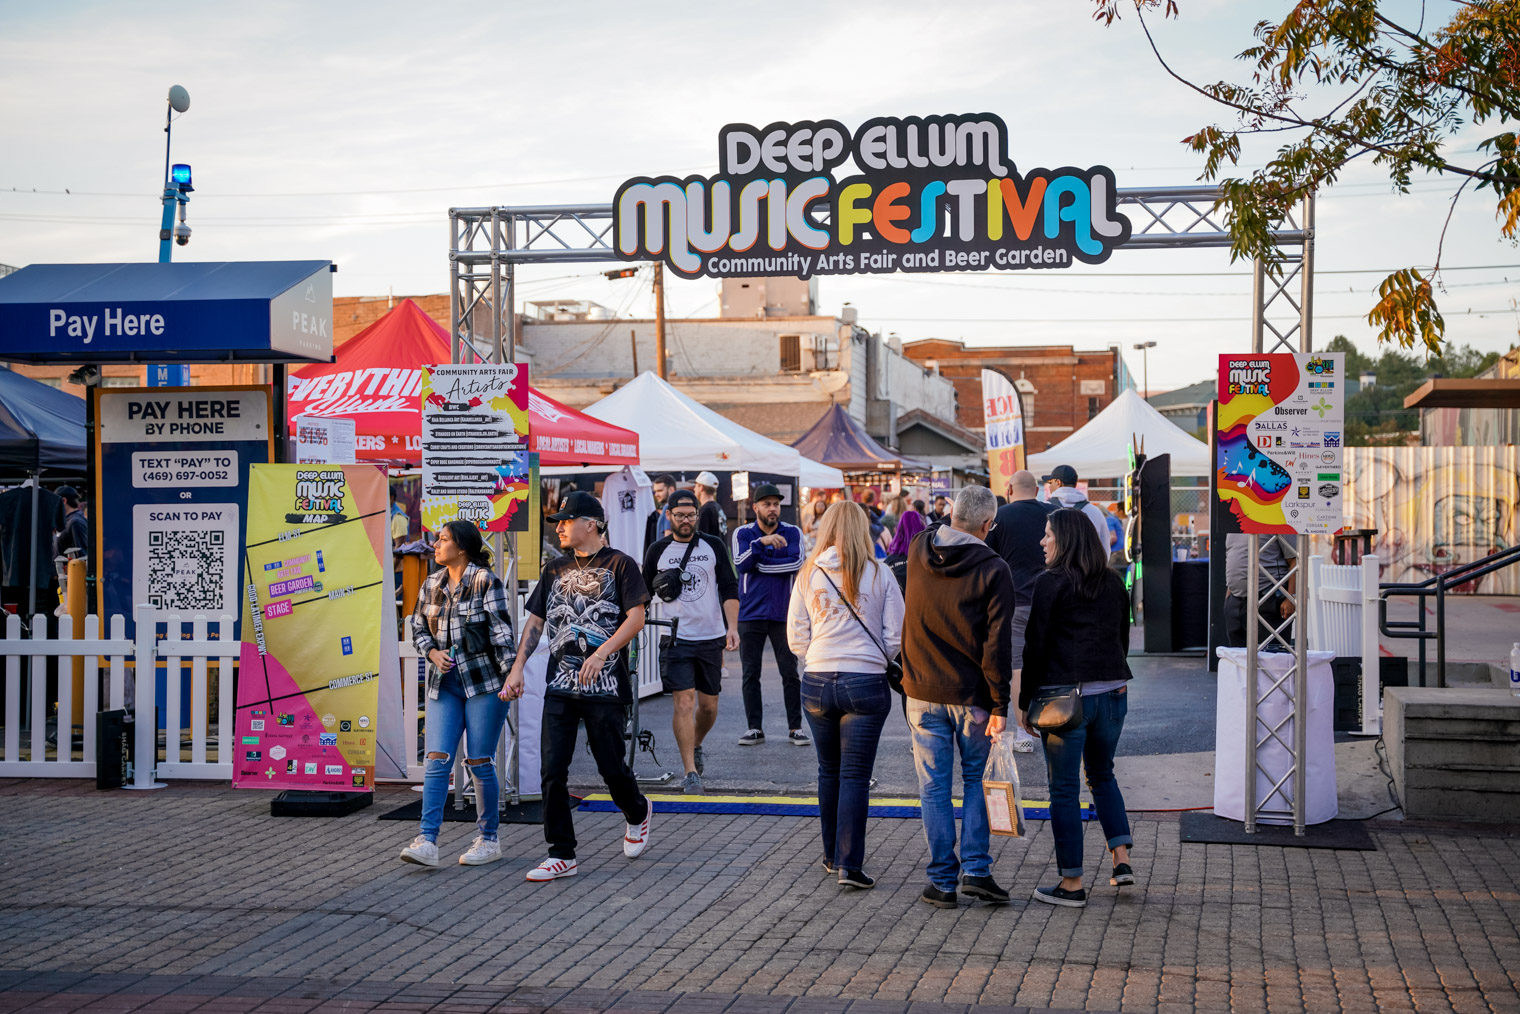 A music festival with art booths